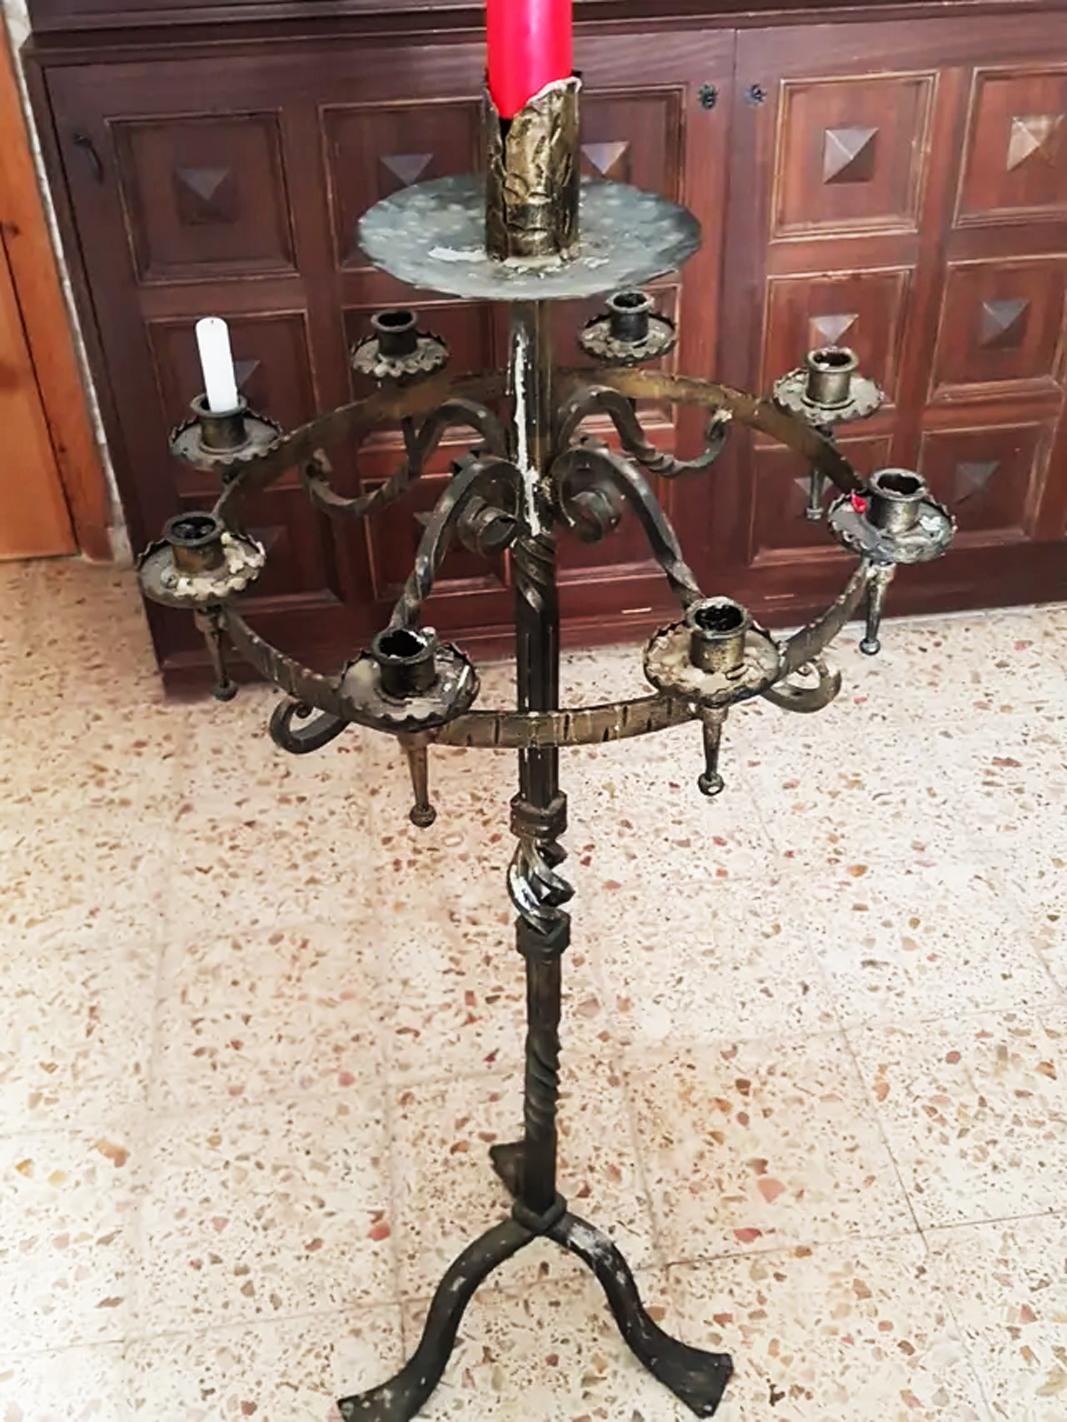 Late 19th Century or Early 20th Century

Votive candlestick, for 9 candles, made in wrought iron 
Golden candlestick candleholder or centerpiece to place on floor candle holder.



   

